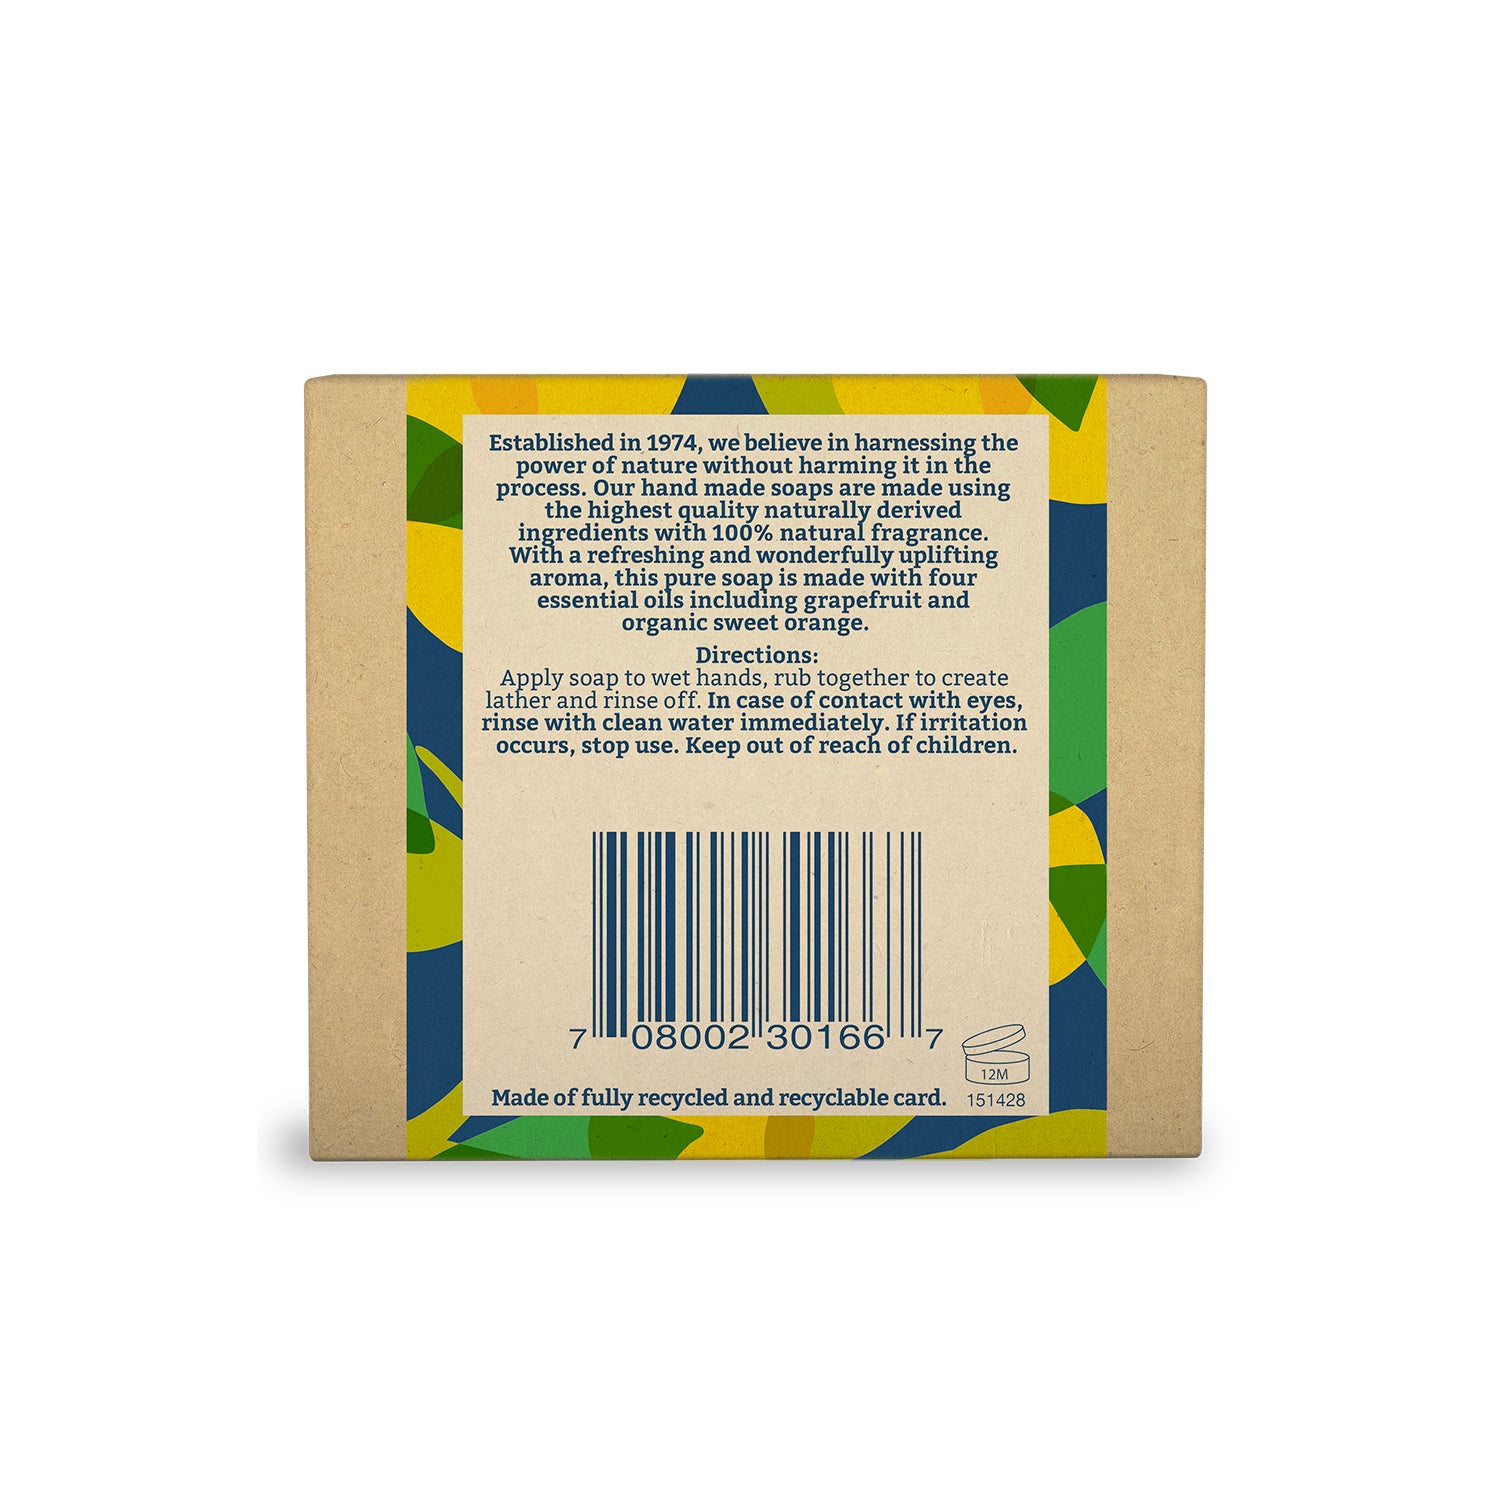 Faith in Nature Boxed Soap 100g - Grapefruit